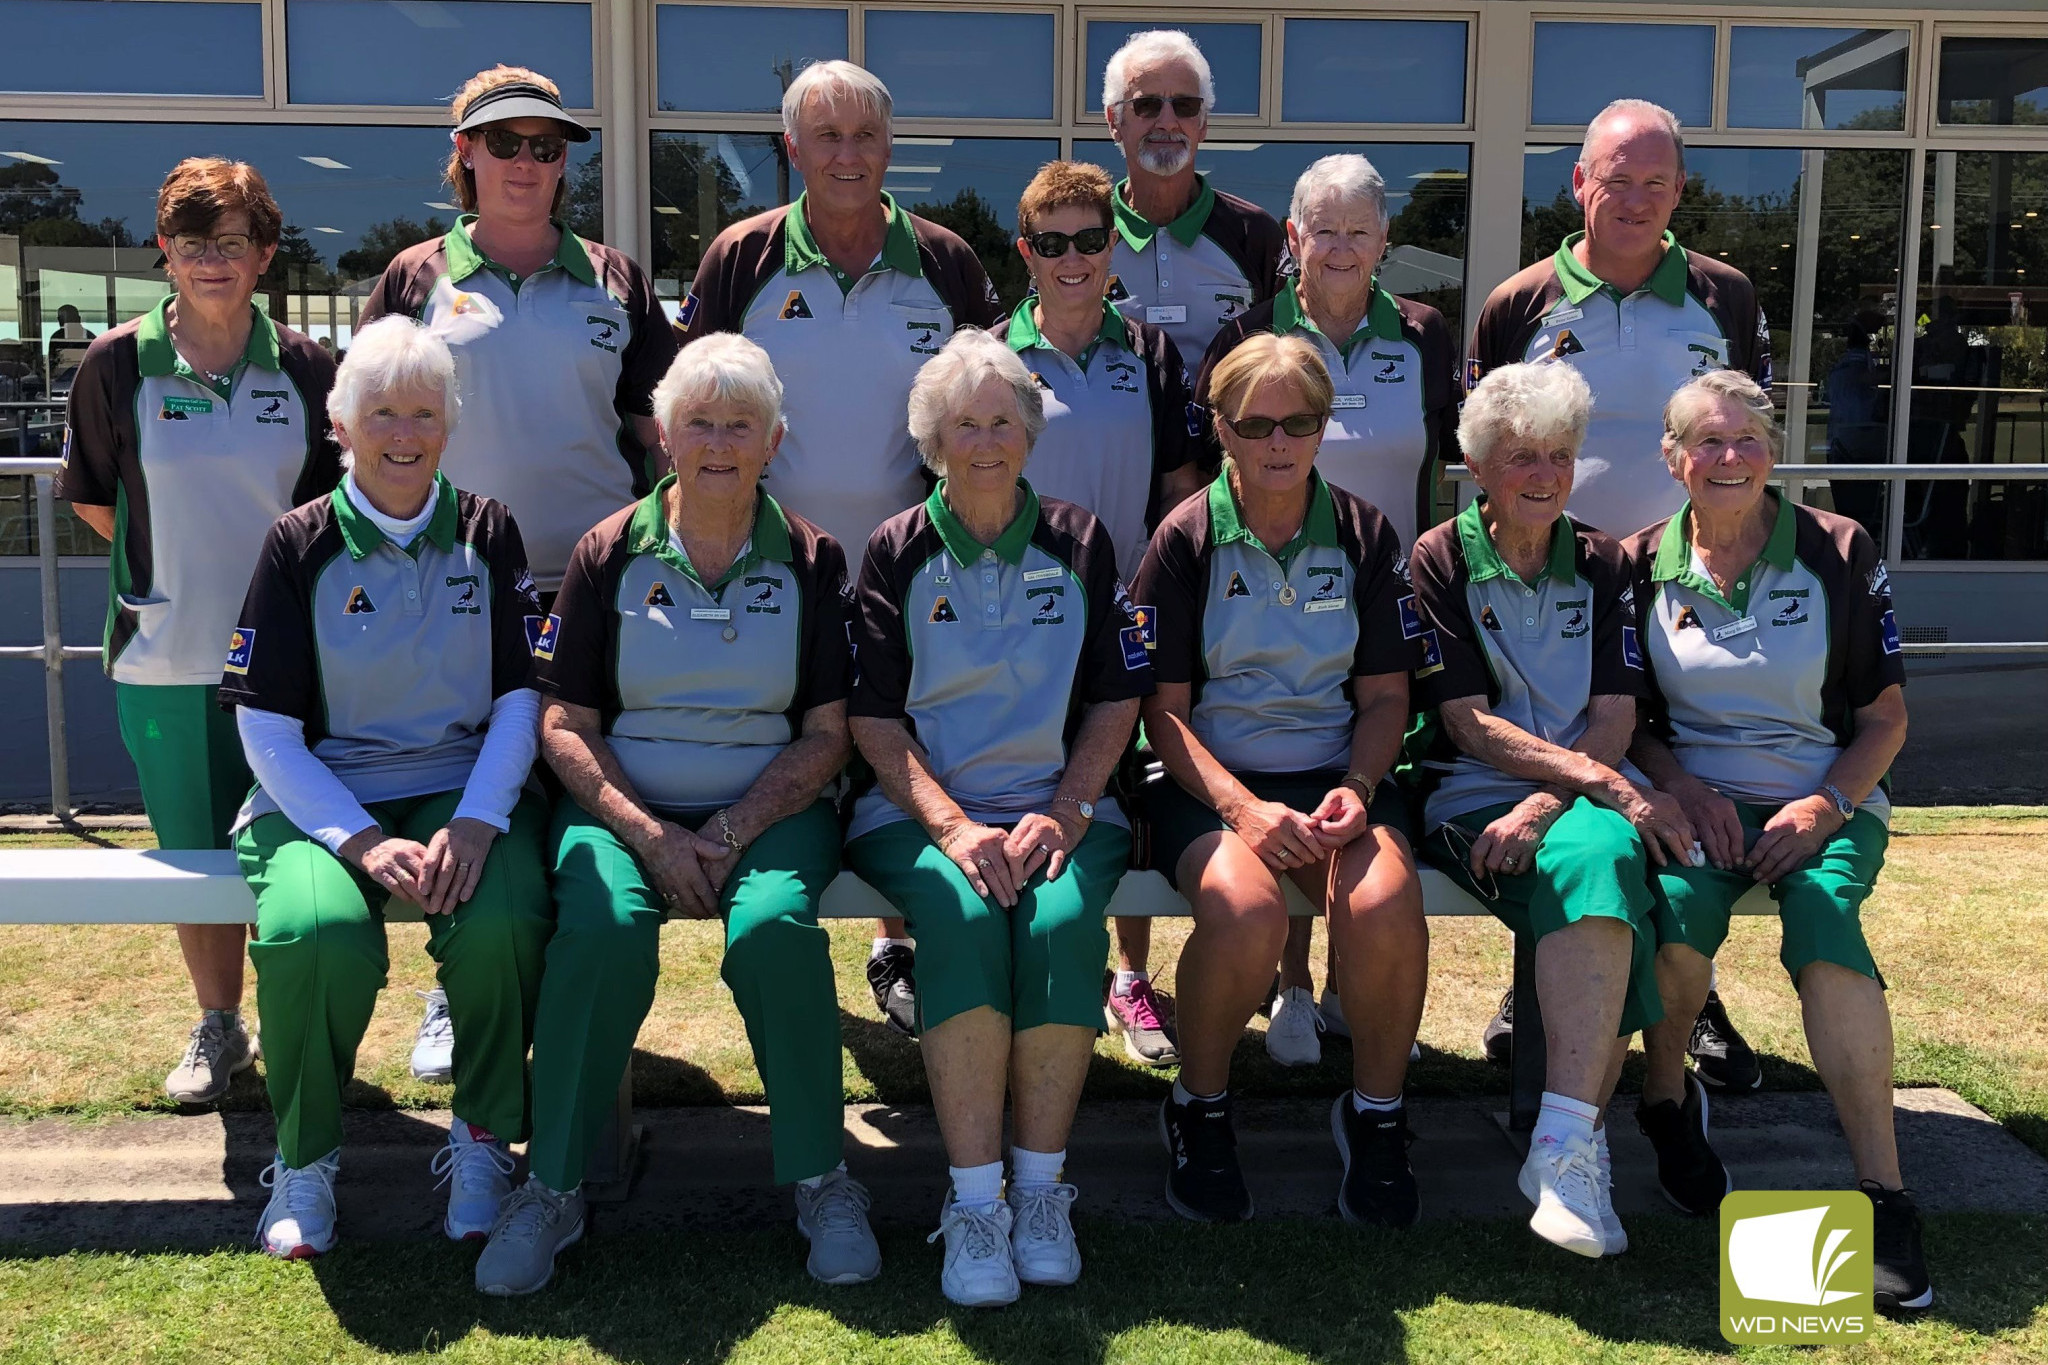 Camperdown Magpies division three midweek runners-up. Back row, from left: Pat Scott, Kell Edwards, Garry Brian, Terri Sinnott, Denis Place, Carol Wilson and Peter James. Front: Norma Weller, Liz Riches, Val Coverdale, Ruth Skene, Ella Blyth and Marg Stephens.